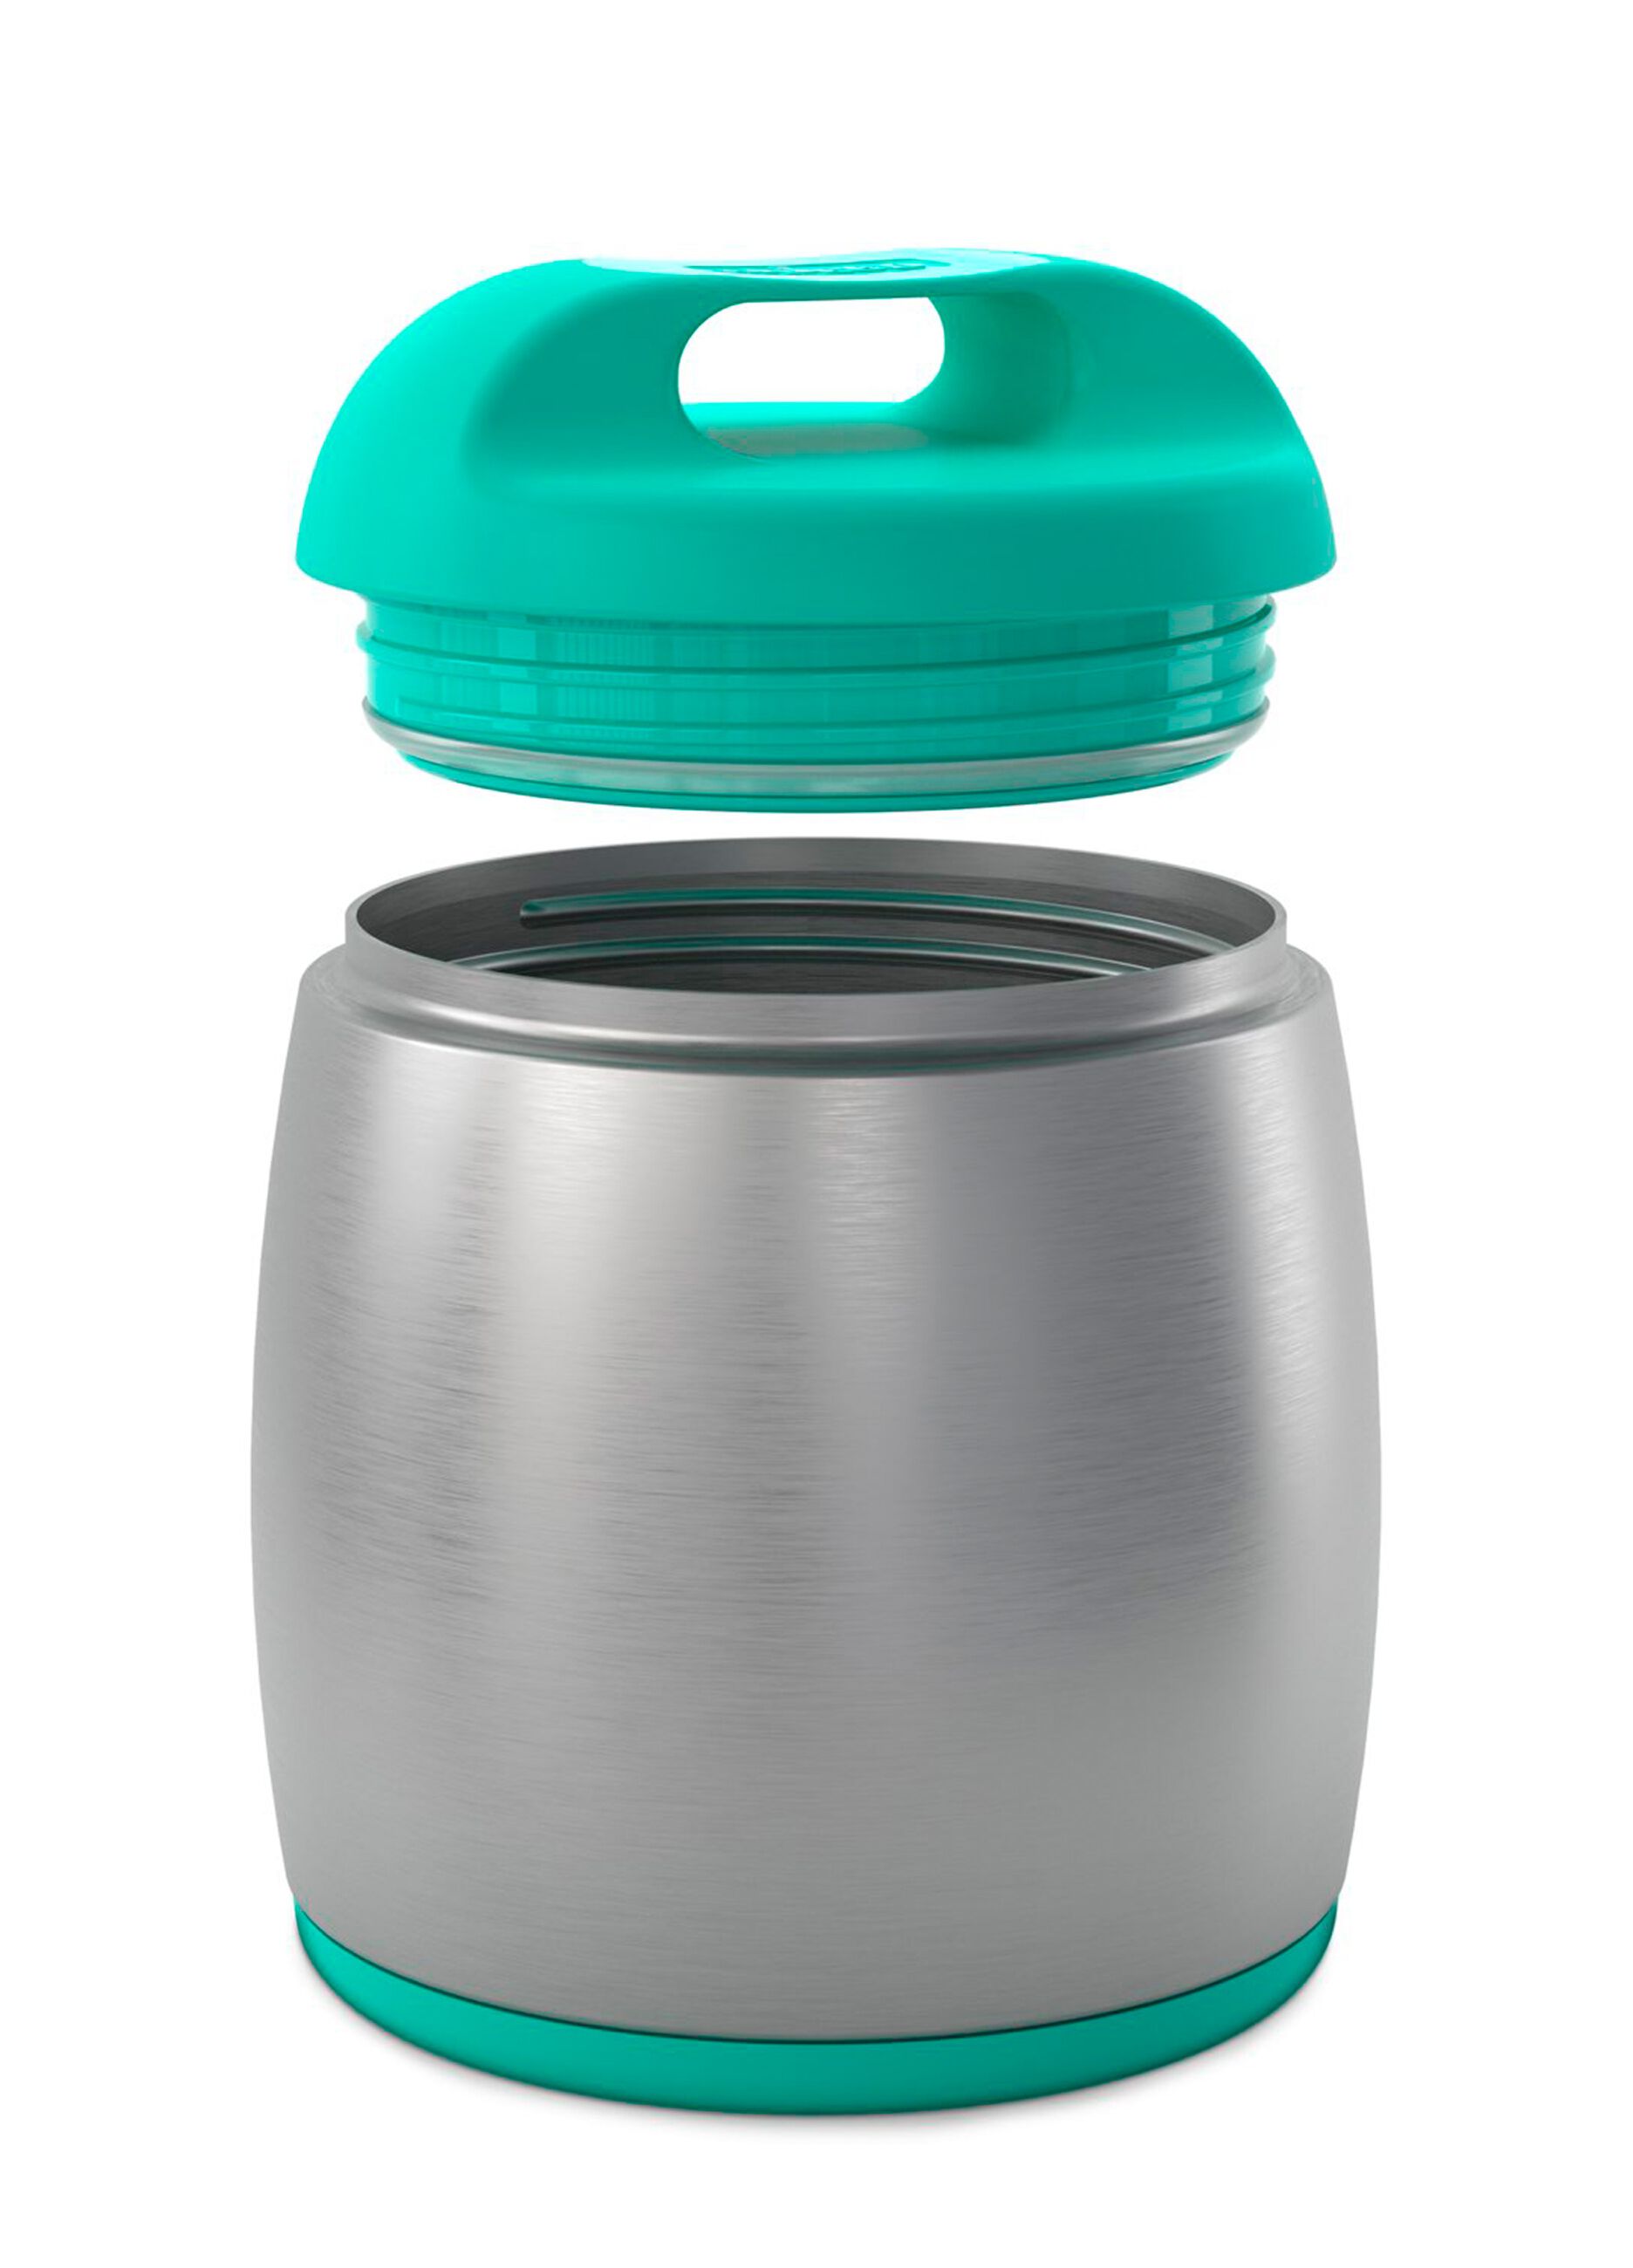 Chicco thermal food container